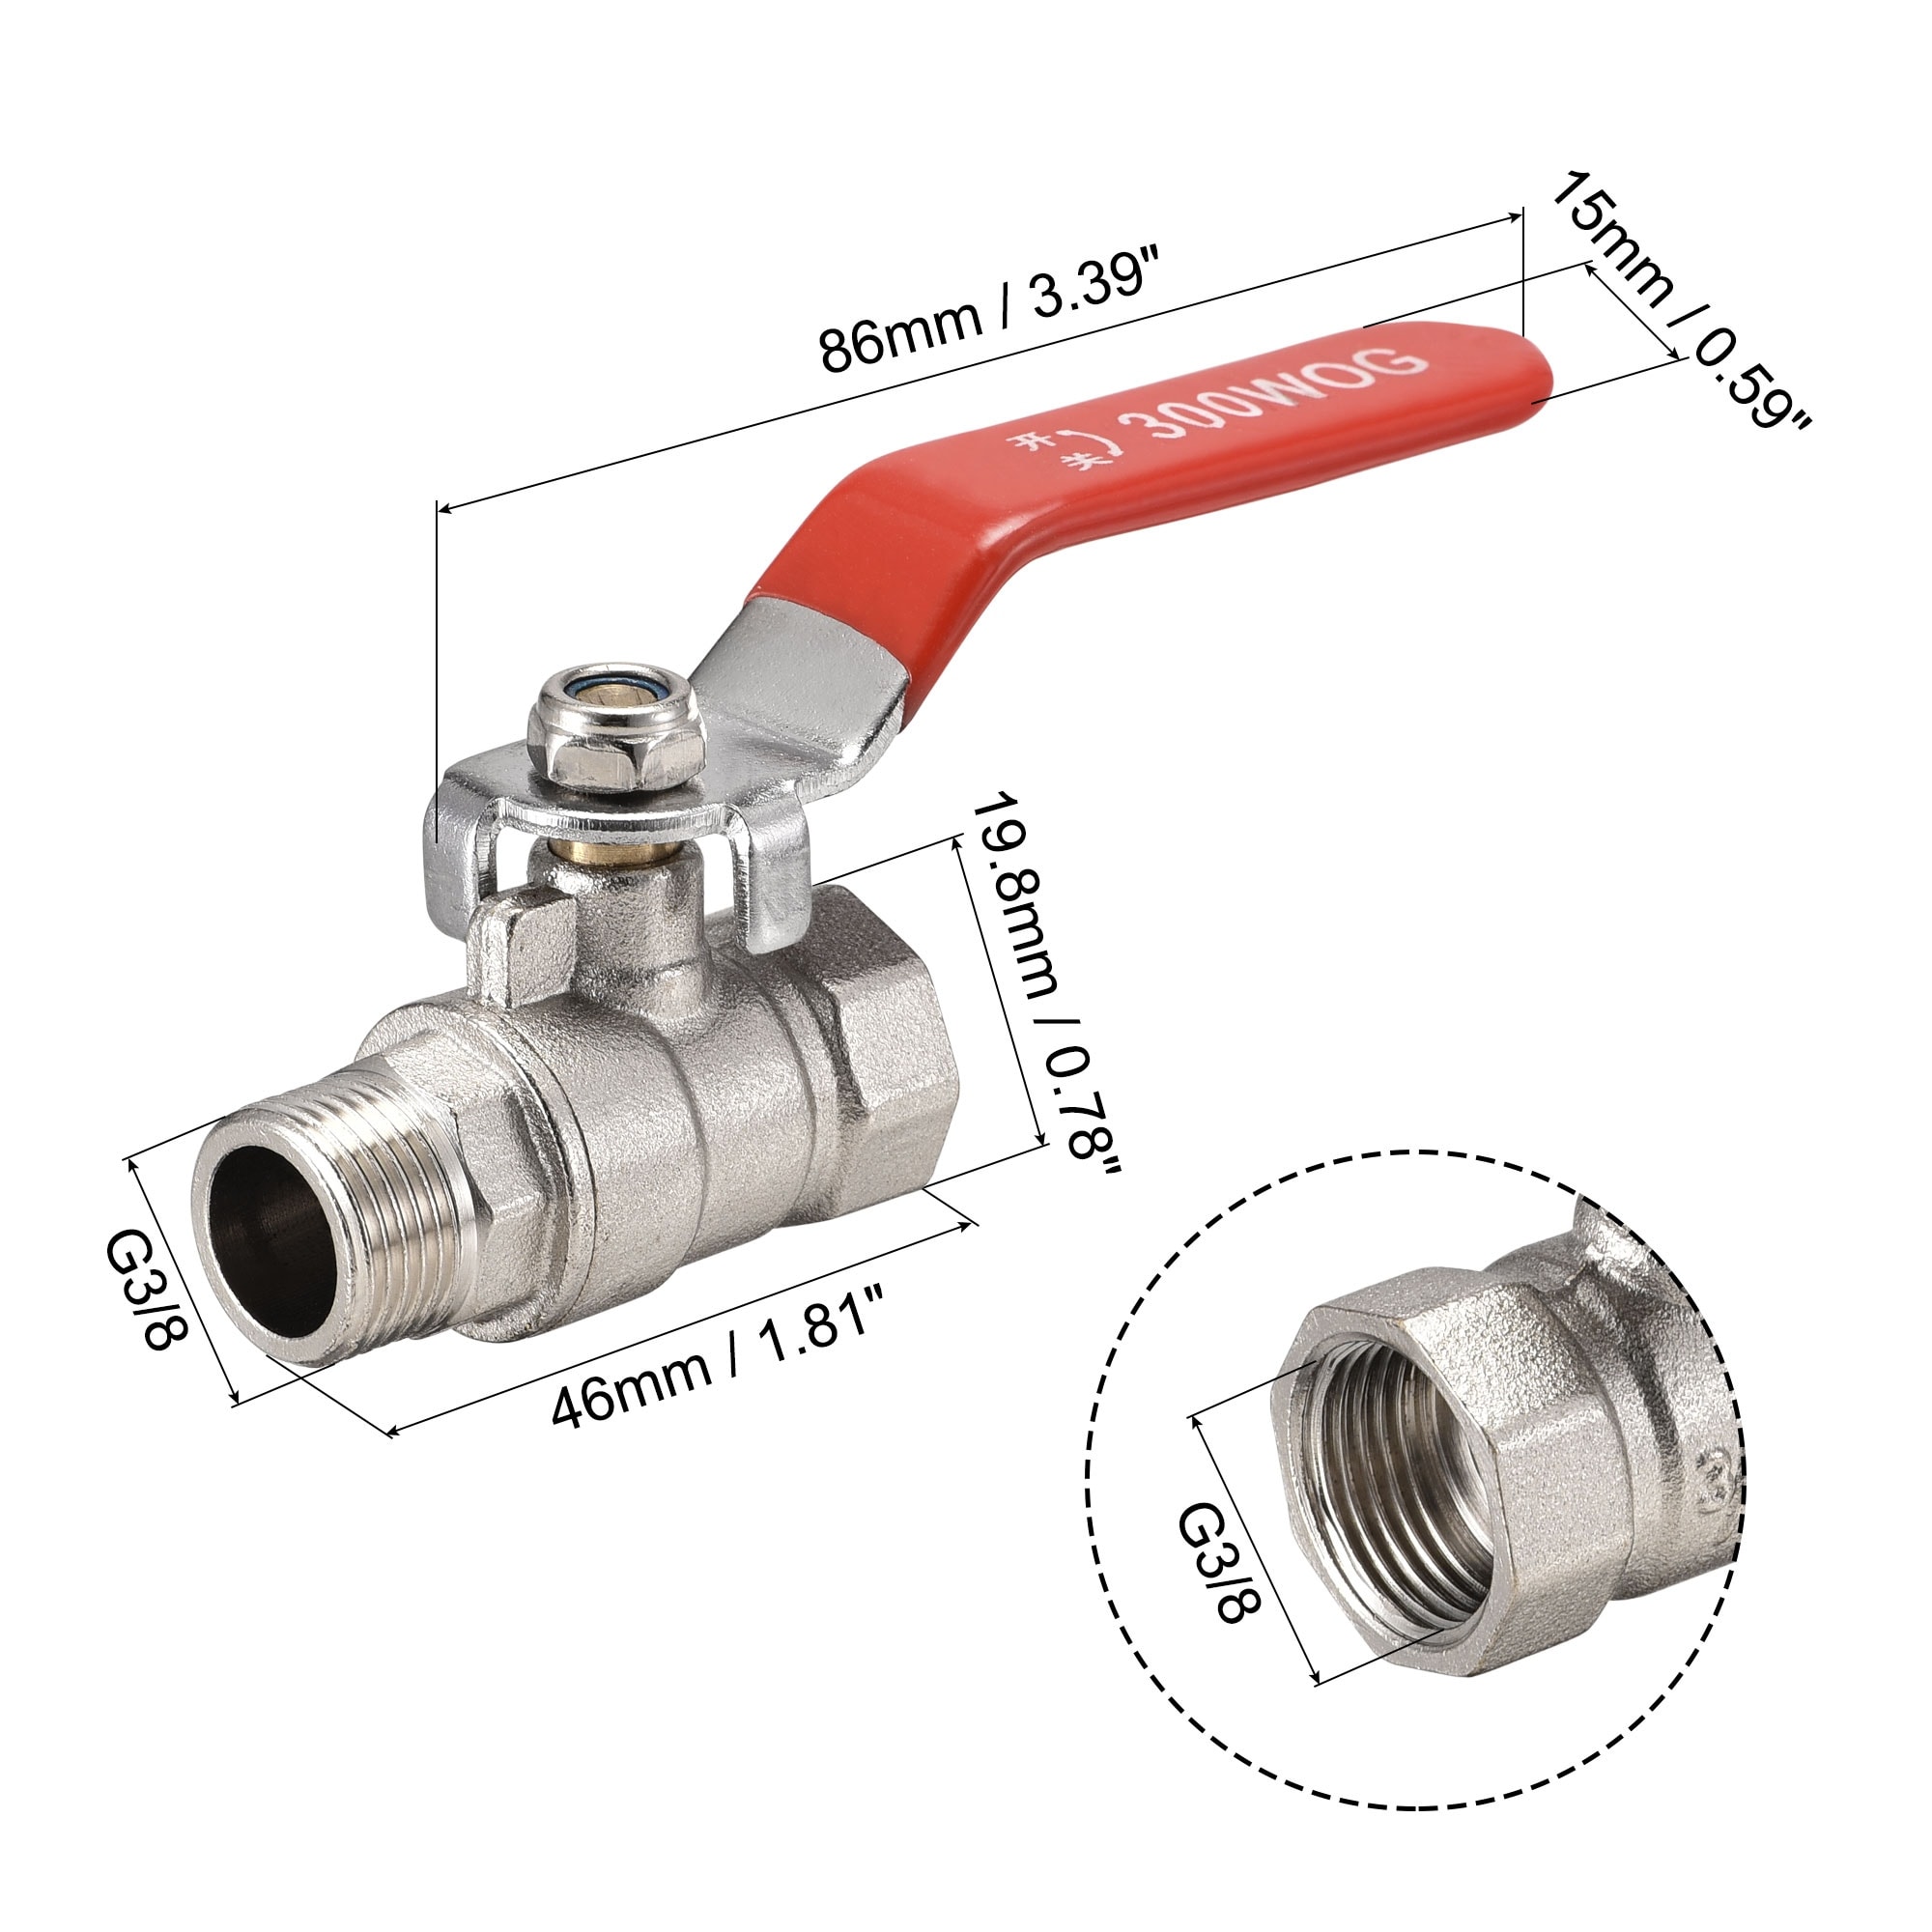 Lever Operated Isolating Valve Red Handle 15mm Chrome. 